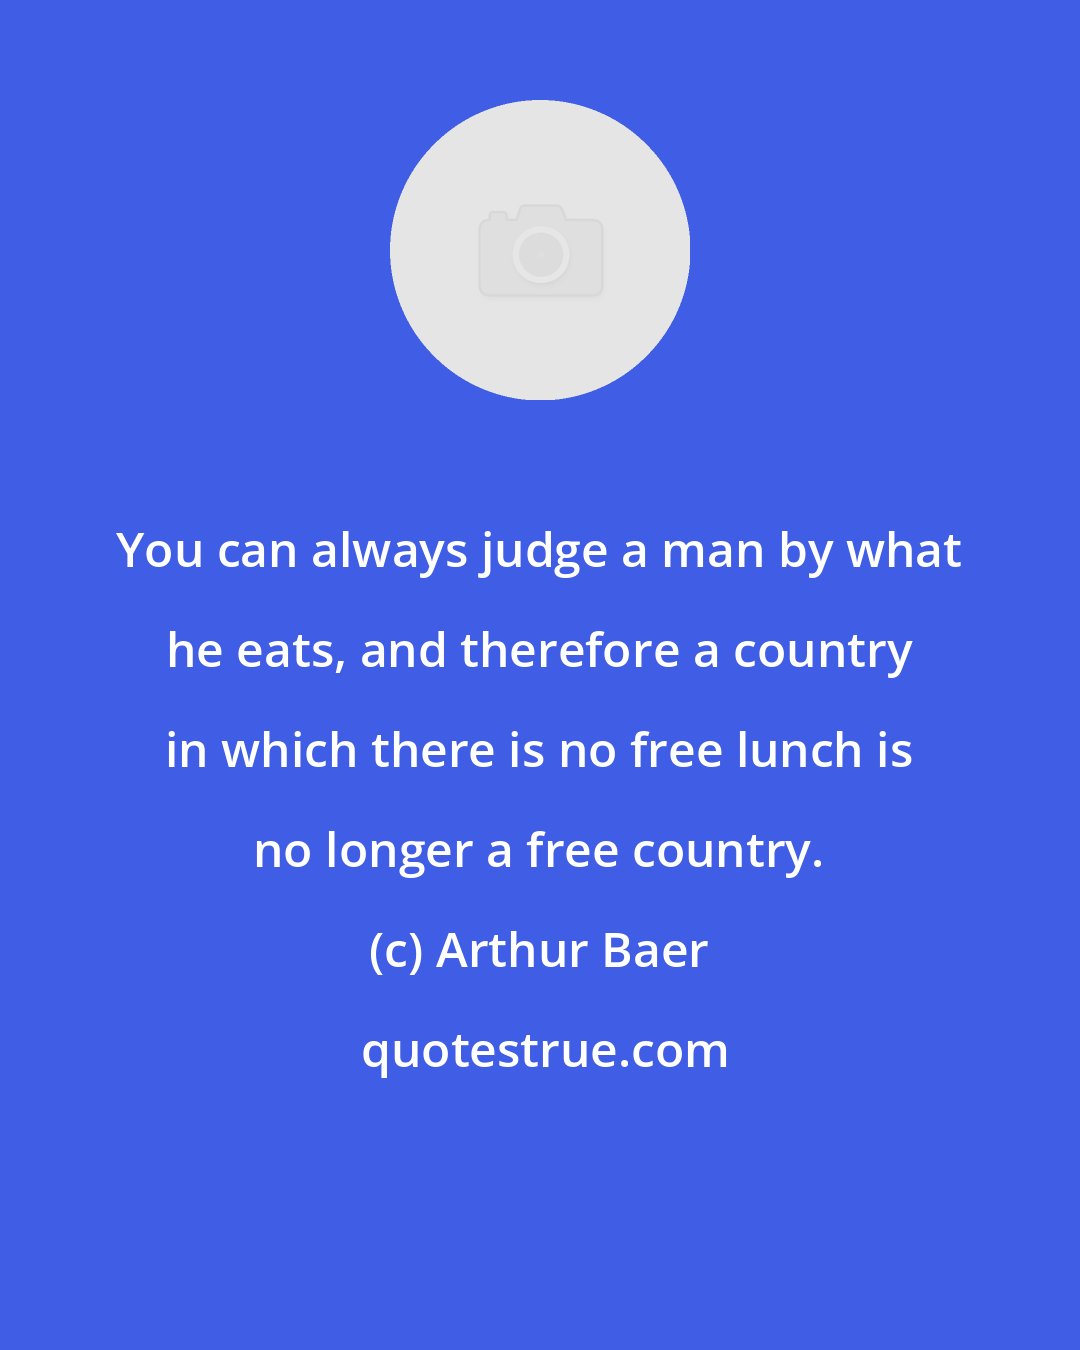 Arthur Baer: You can always judge a man by what he eats, and therefore a country in which there is no free lunch is no longer a free country.